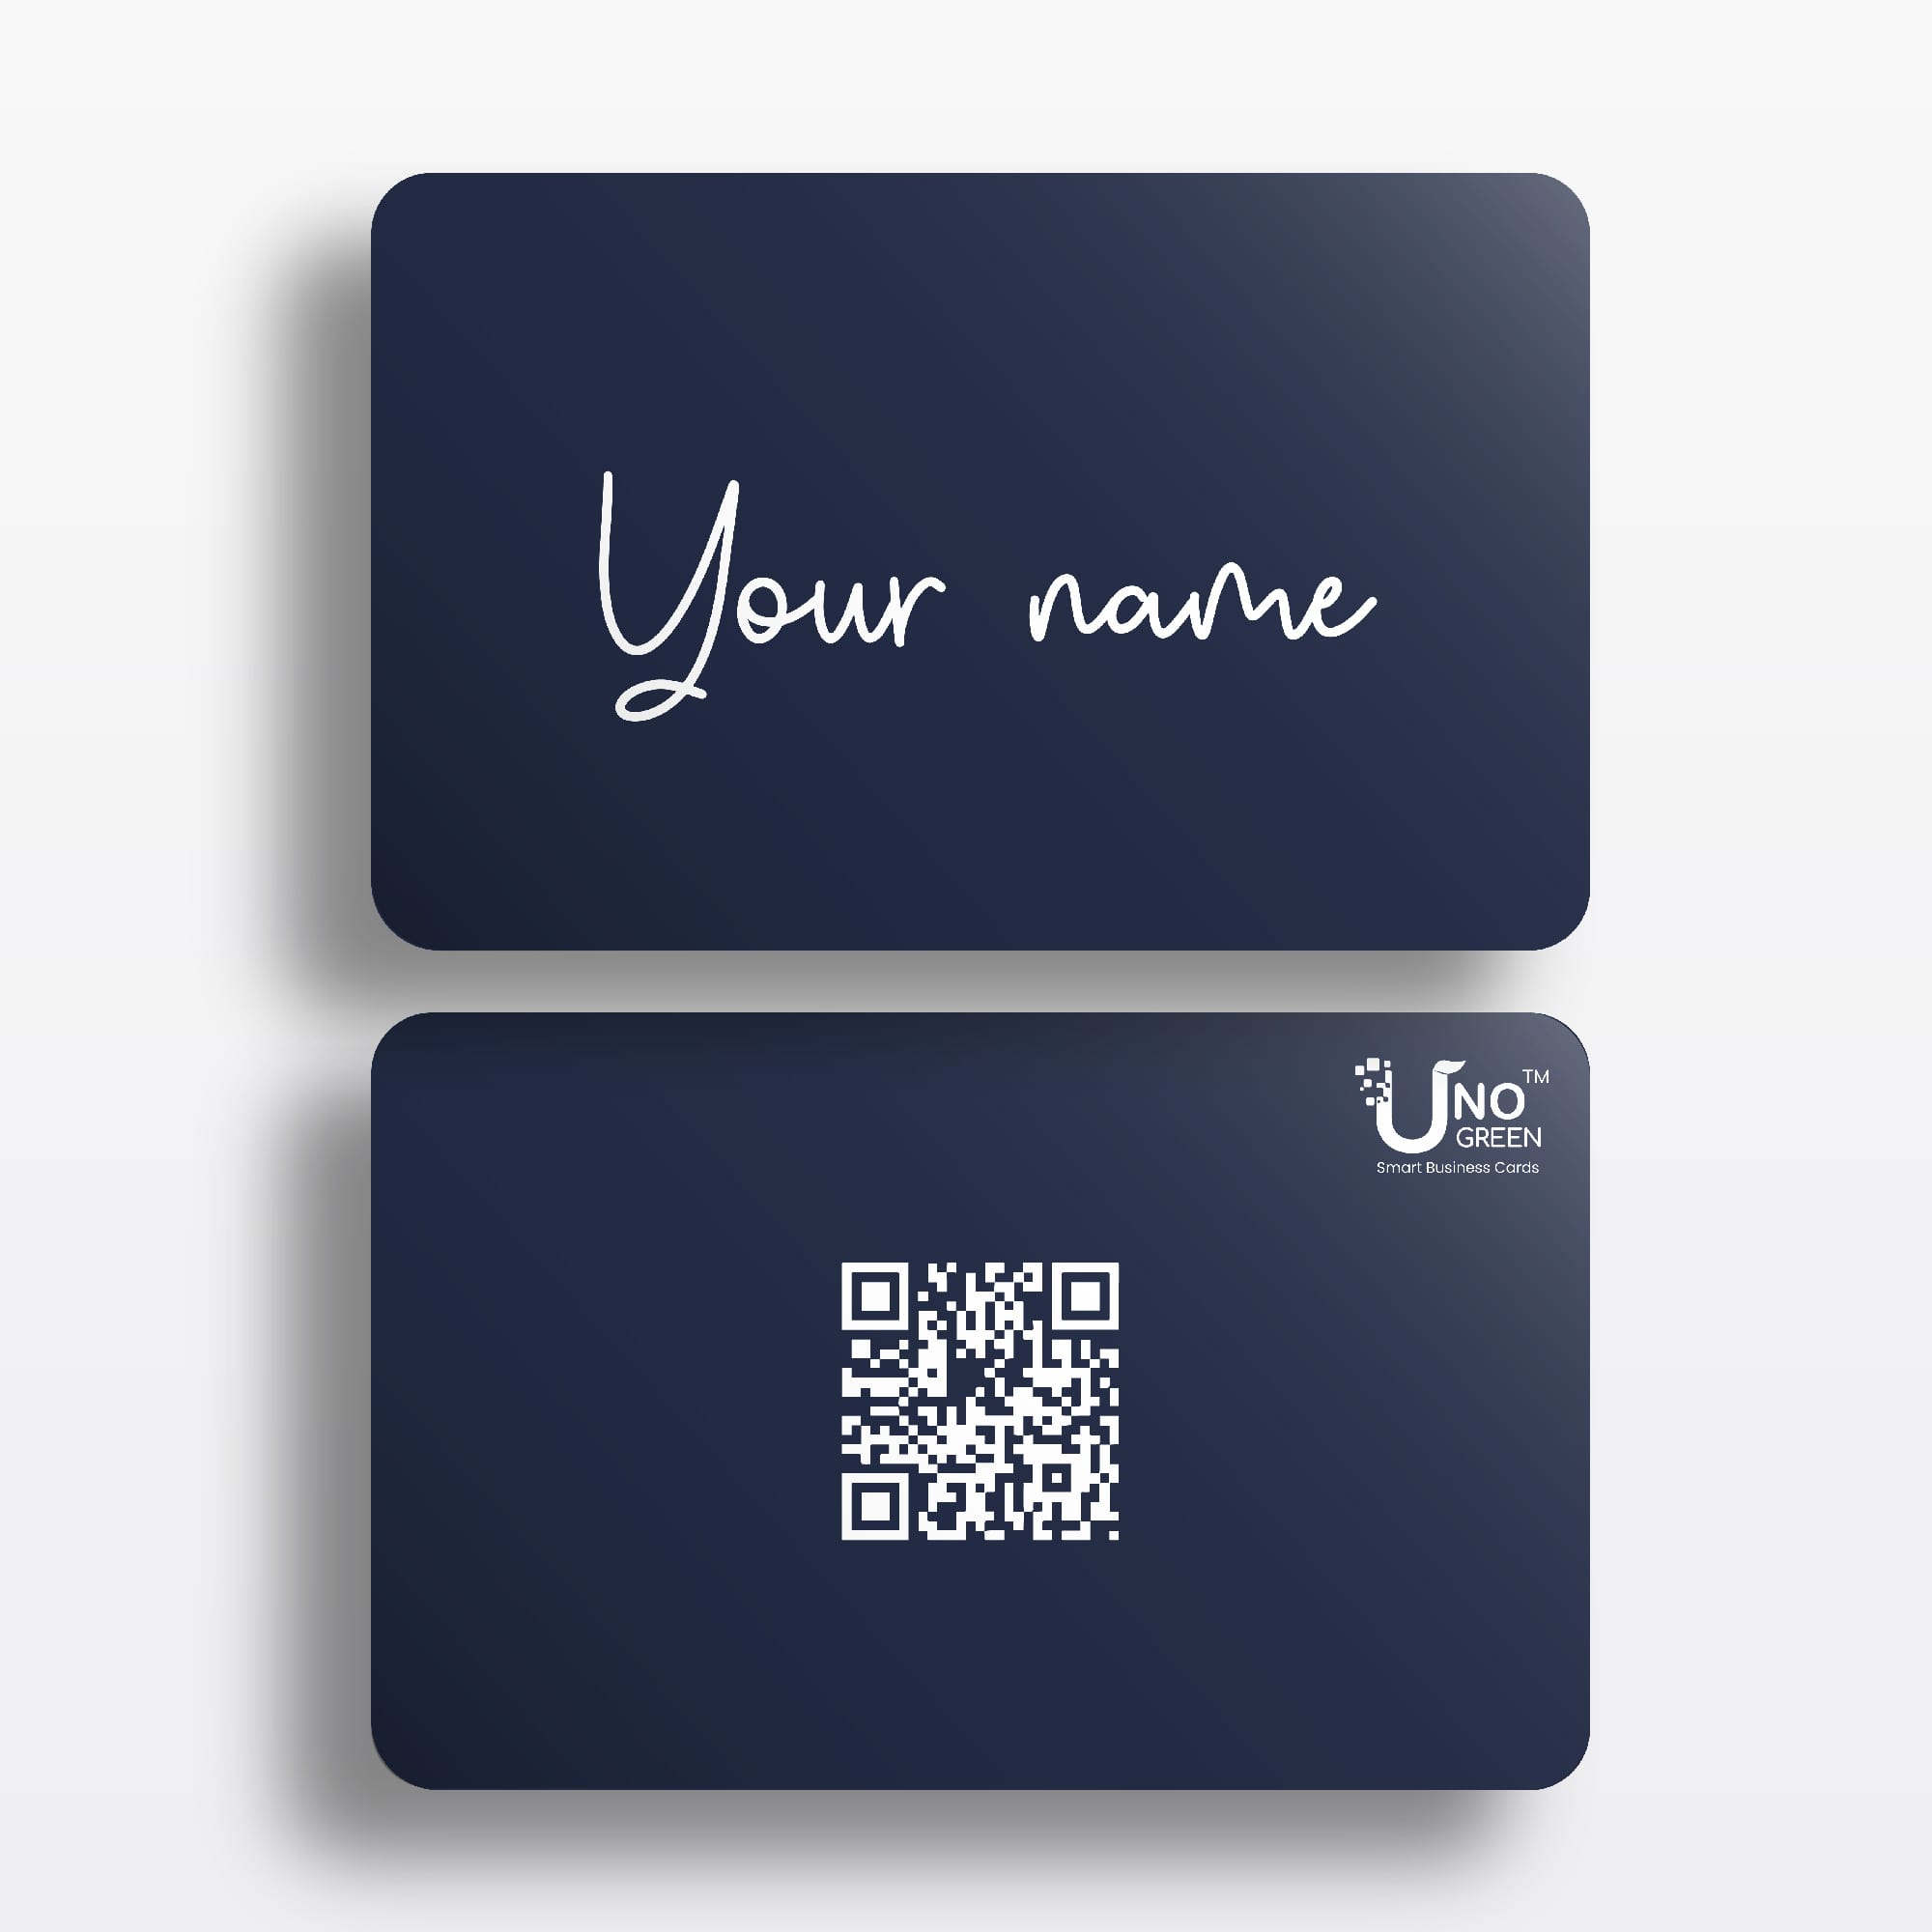 Blue and Silver - UnoGreen Smart Business Cards